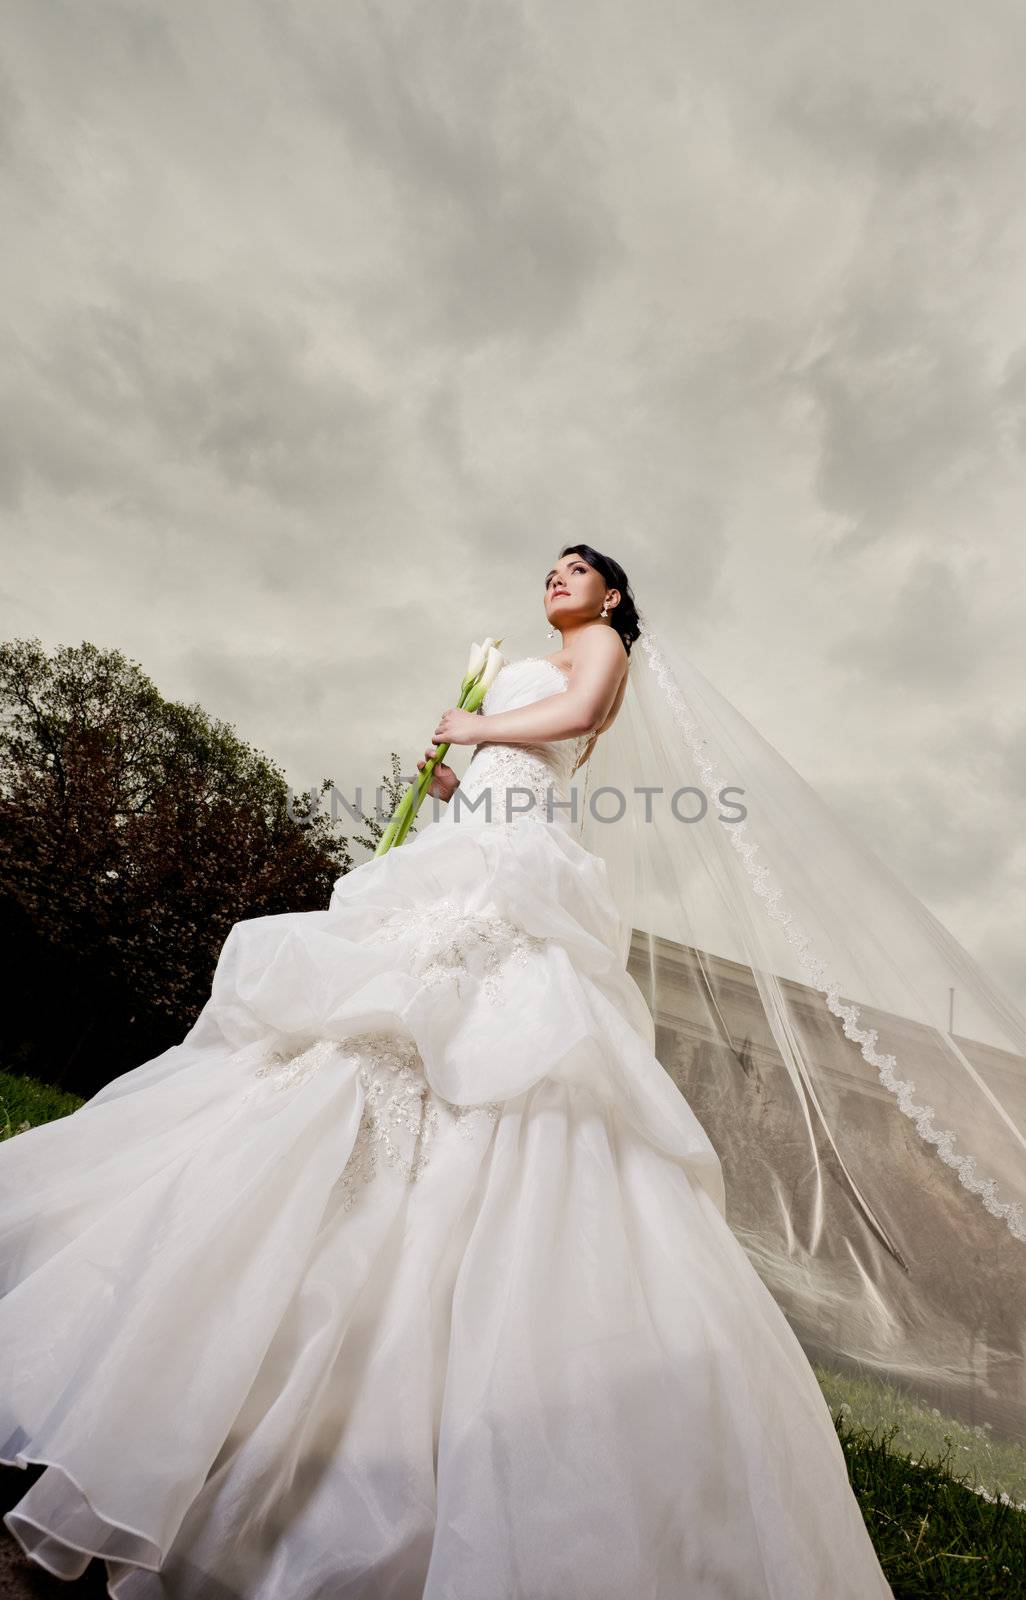 Beautiful bride standing outdoors by vilevi